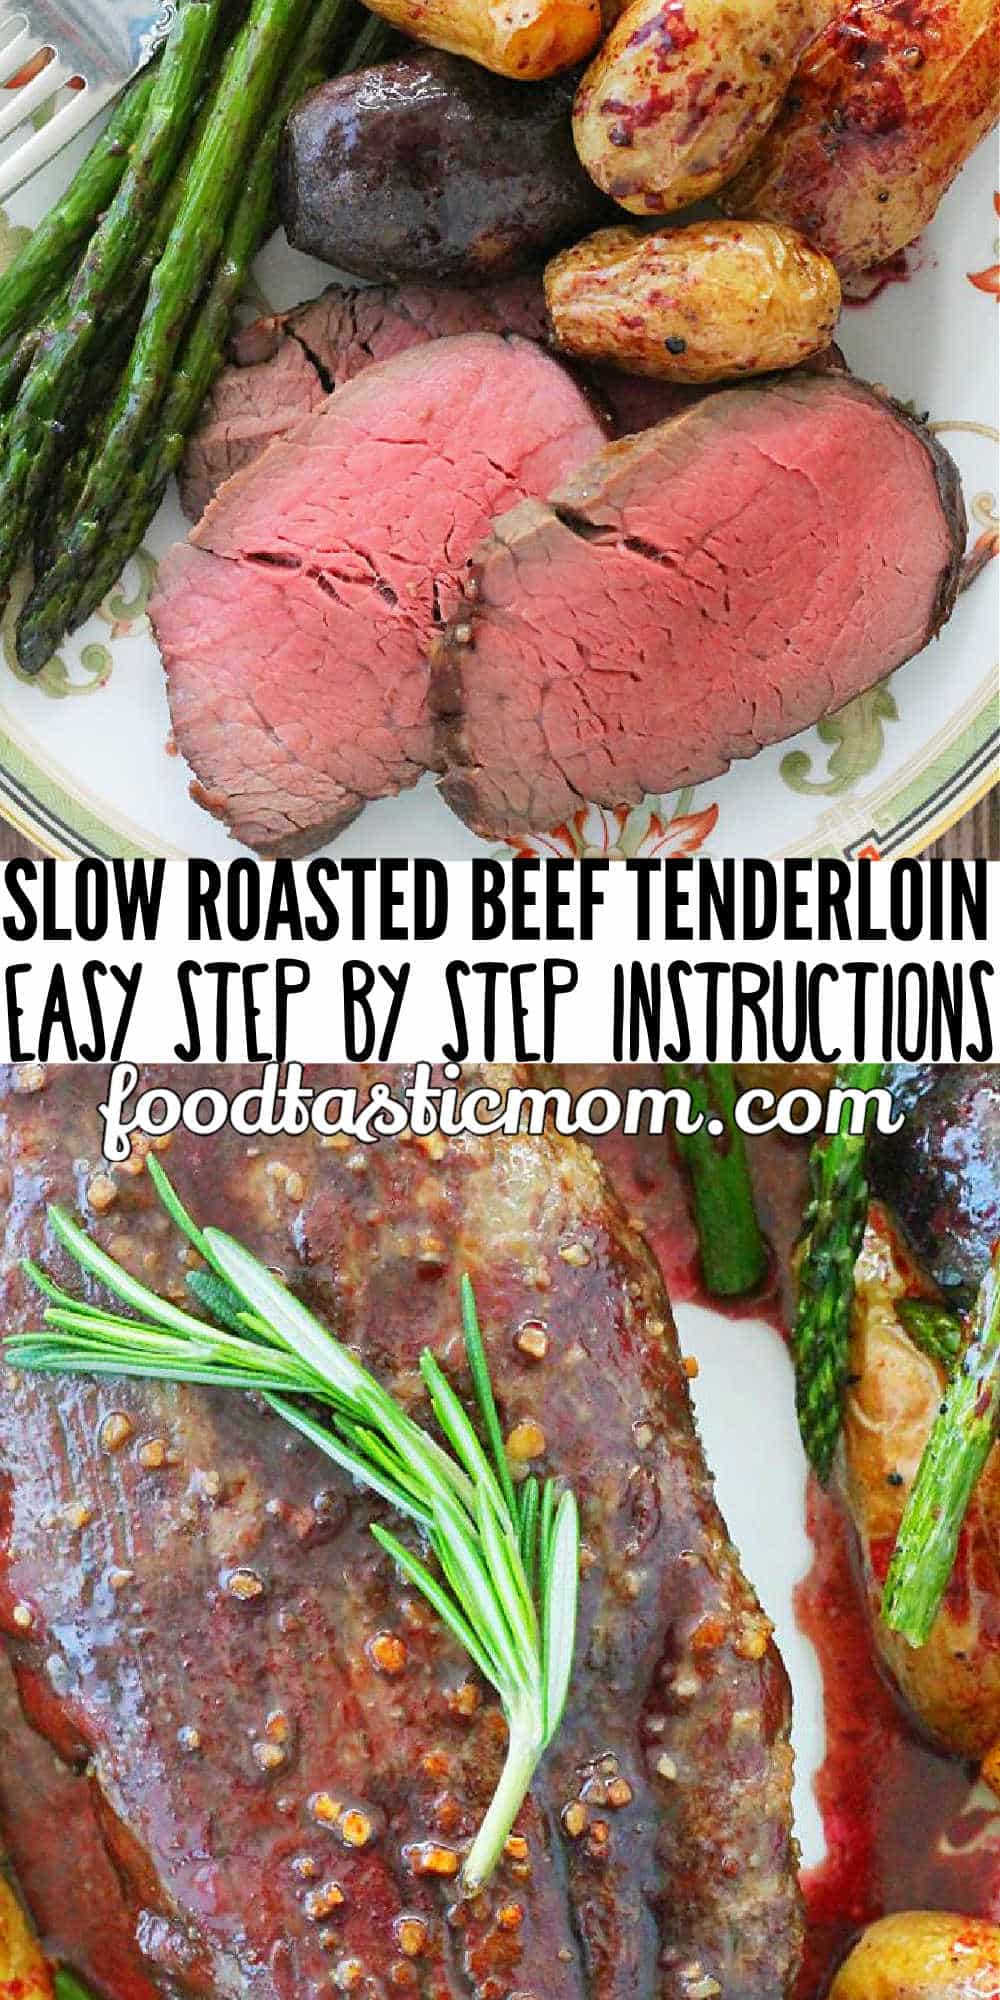 Slow Roasted Beef Tenderloin with a simple red wine pan sauce is the most delicious, show stopping centerpiece for your holiday dinner table. via @foodtasticmom